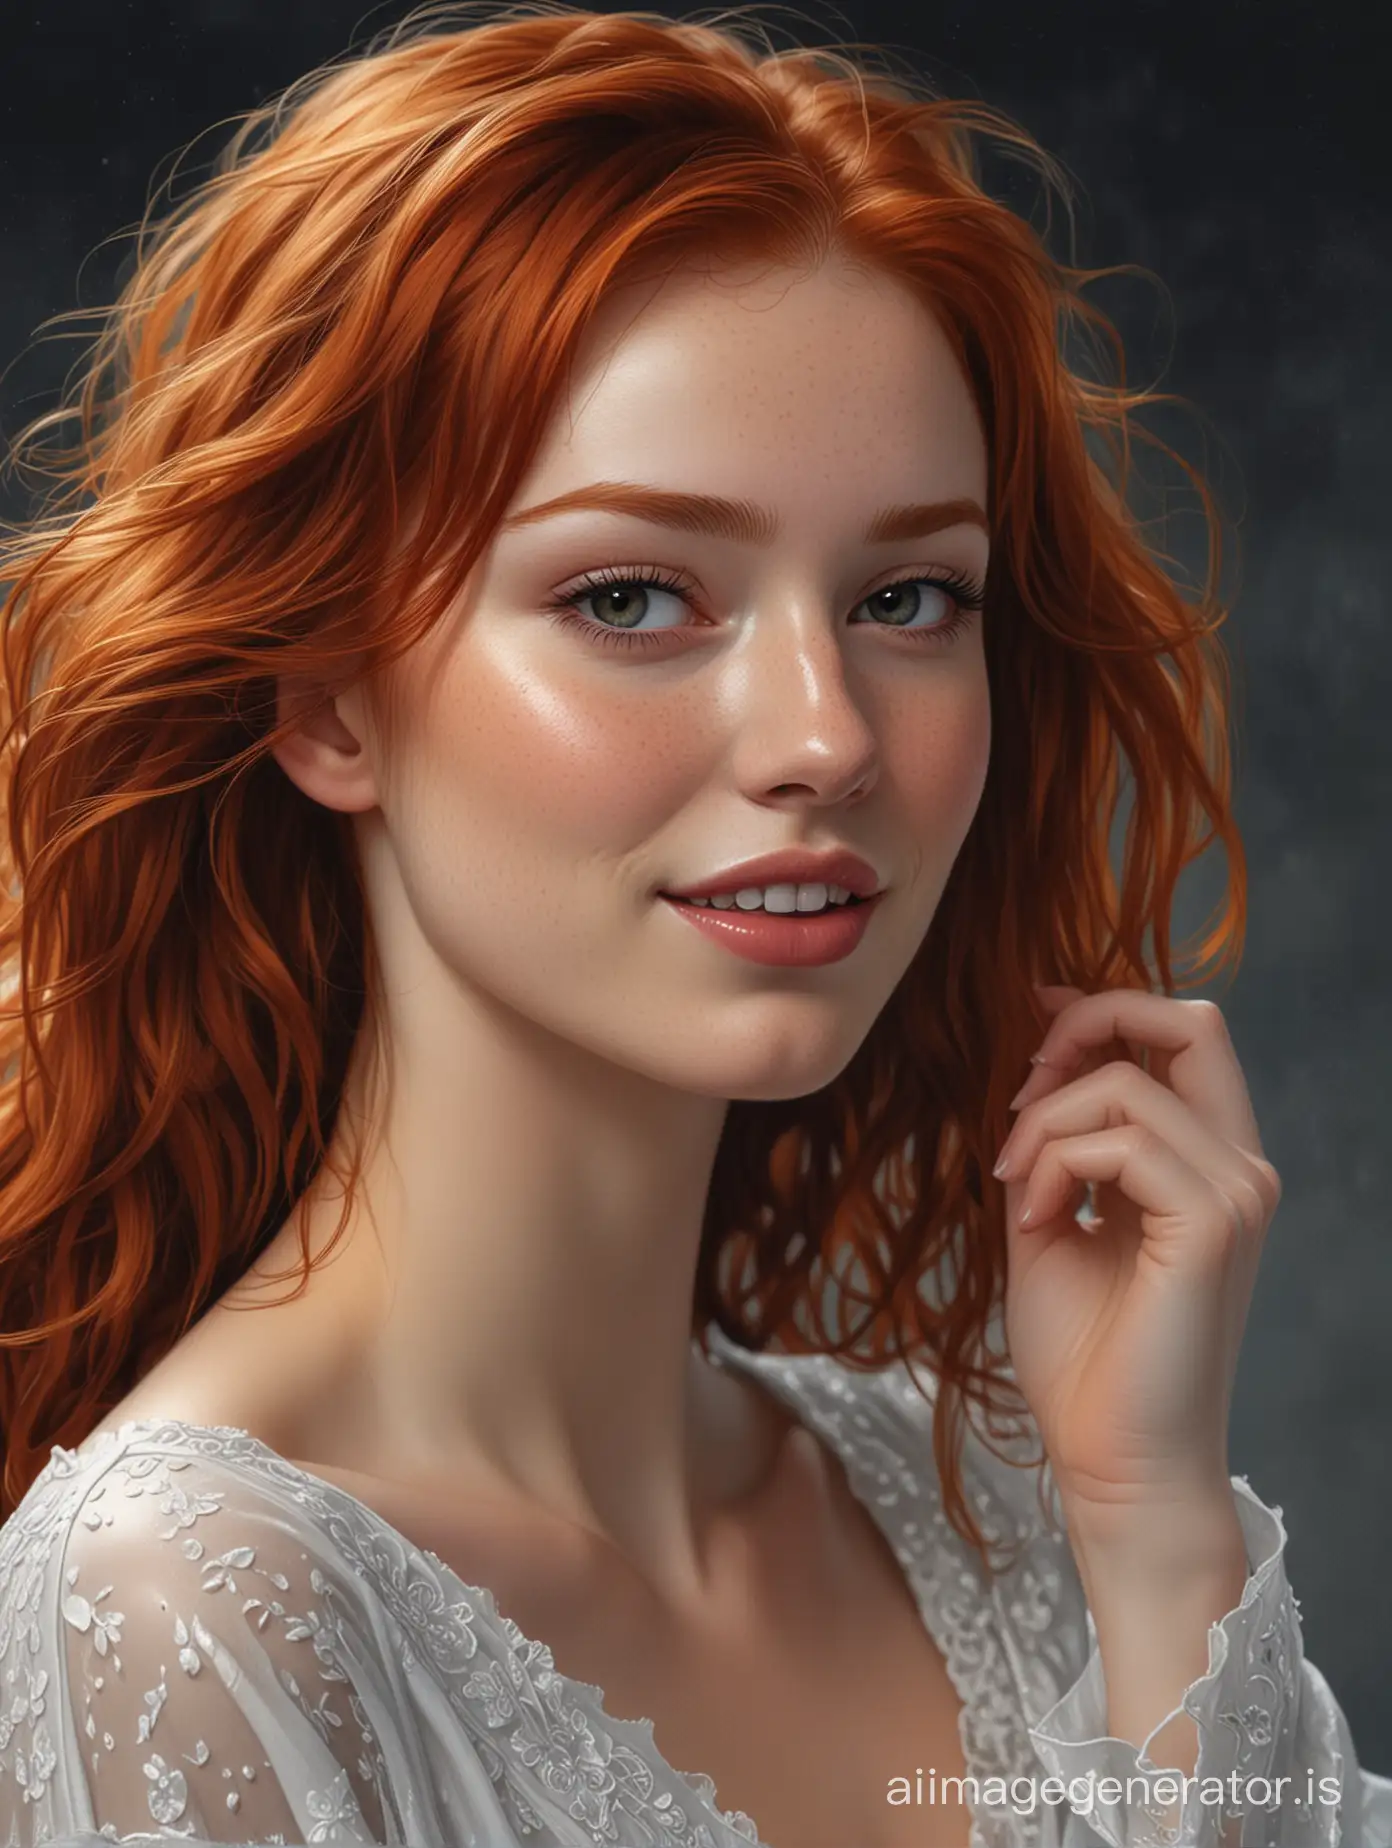 Breathtaking-Redhead-with-Freckles-in-Intricately-Detailed-Nightgown